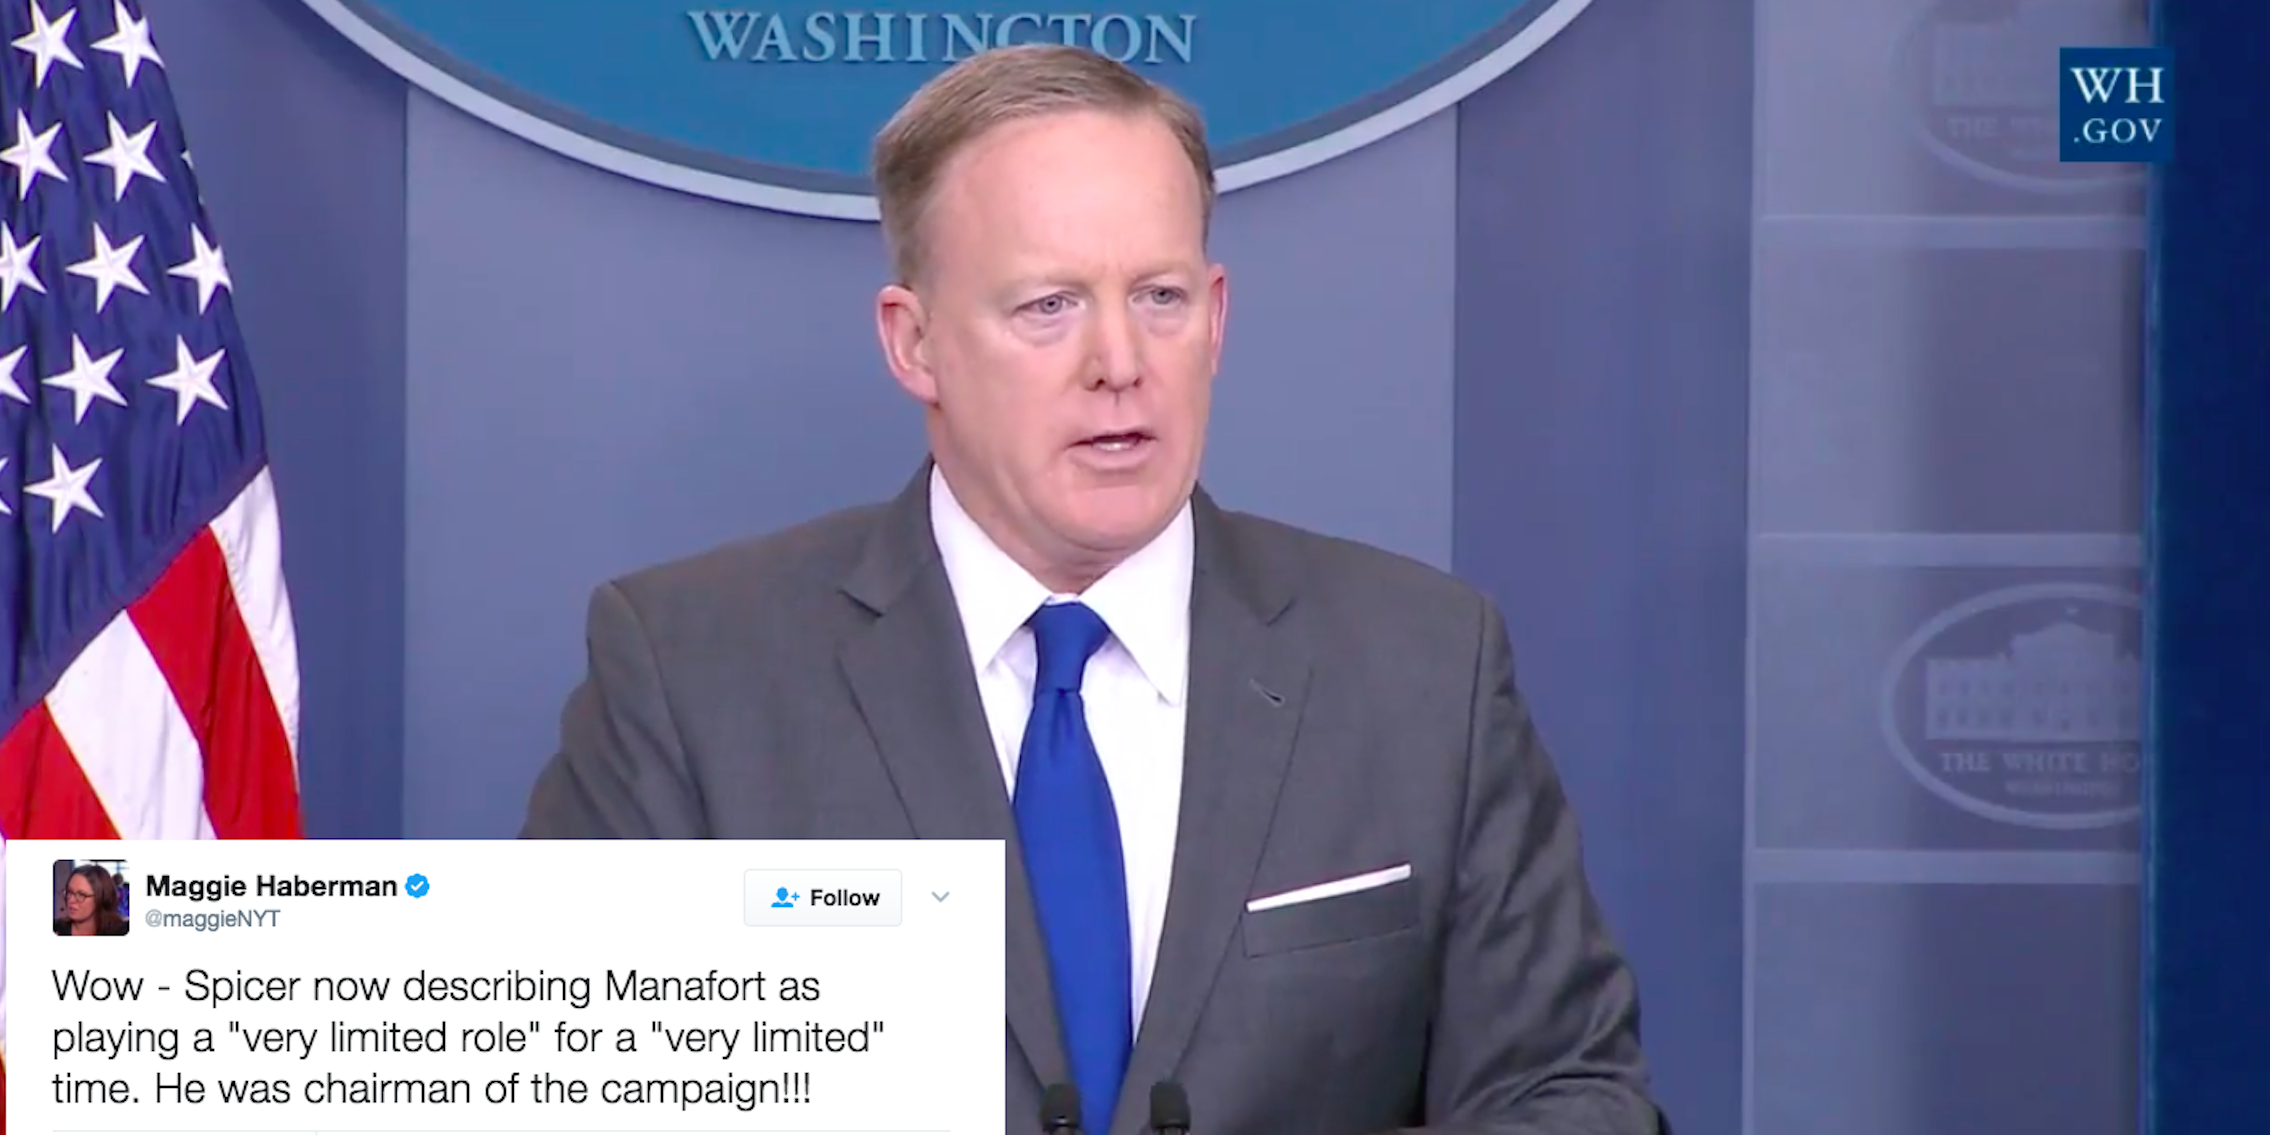 sean spicer press briefing: spicer says manafort had limited role